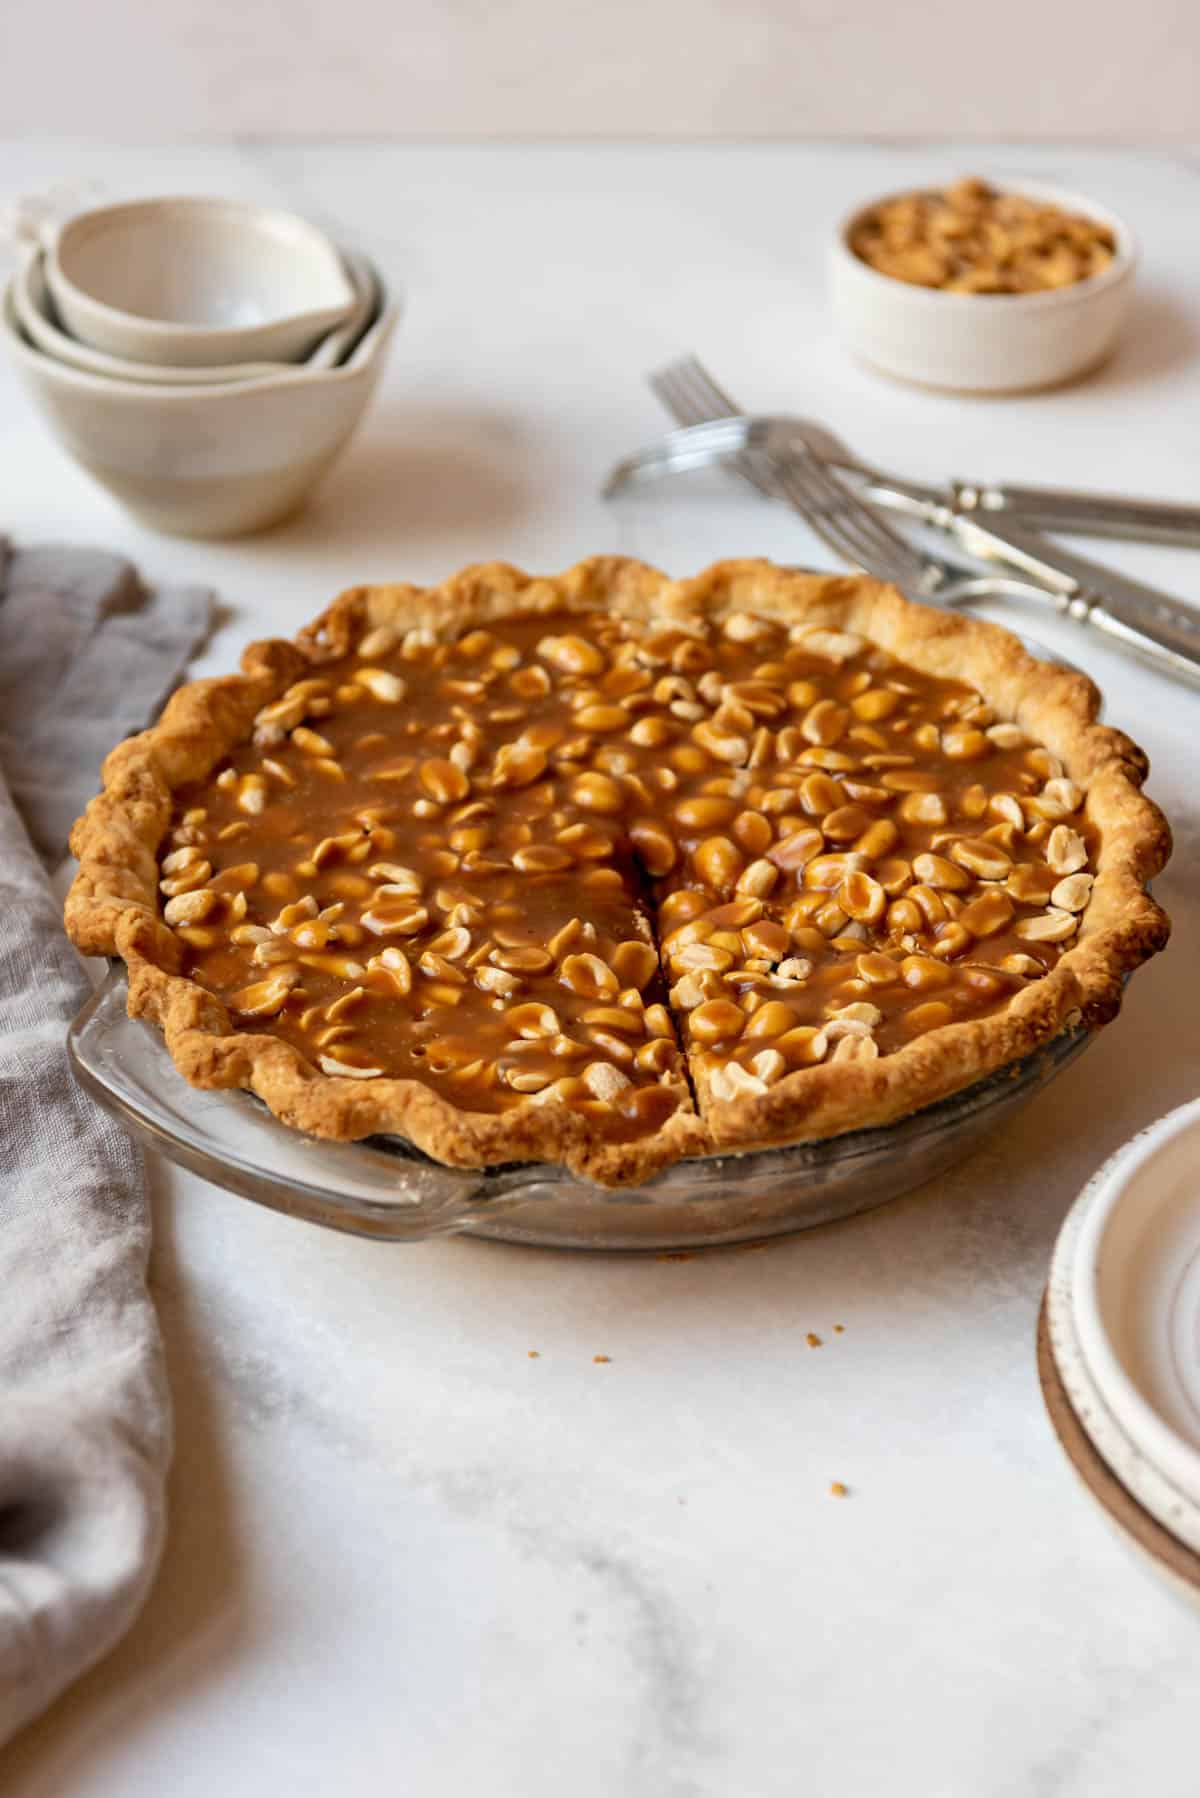 A payday pie with peanuts next to forks, bowls, and a cloth napkin.